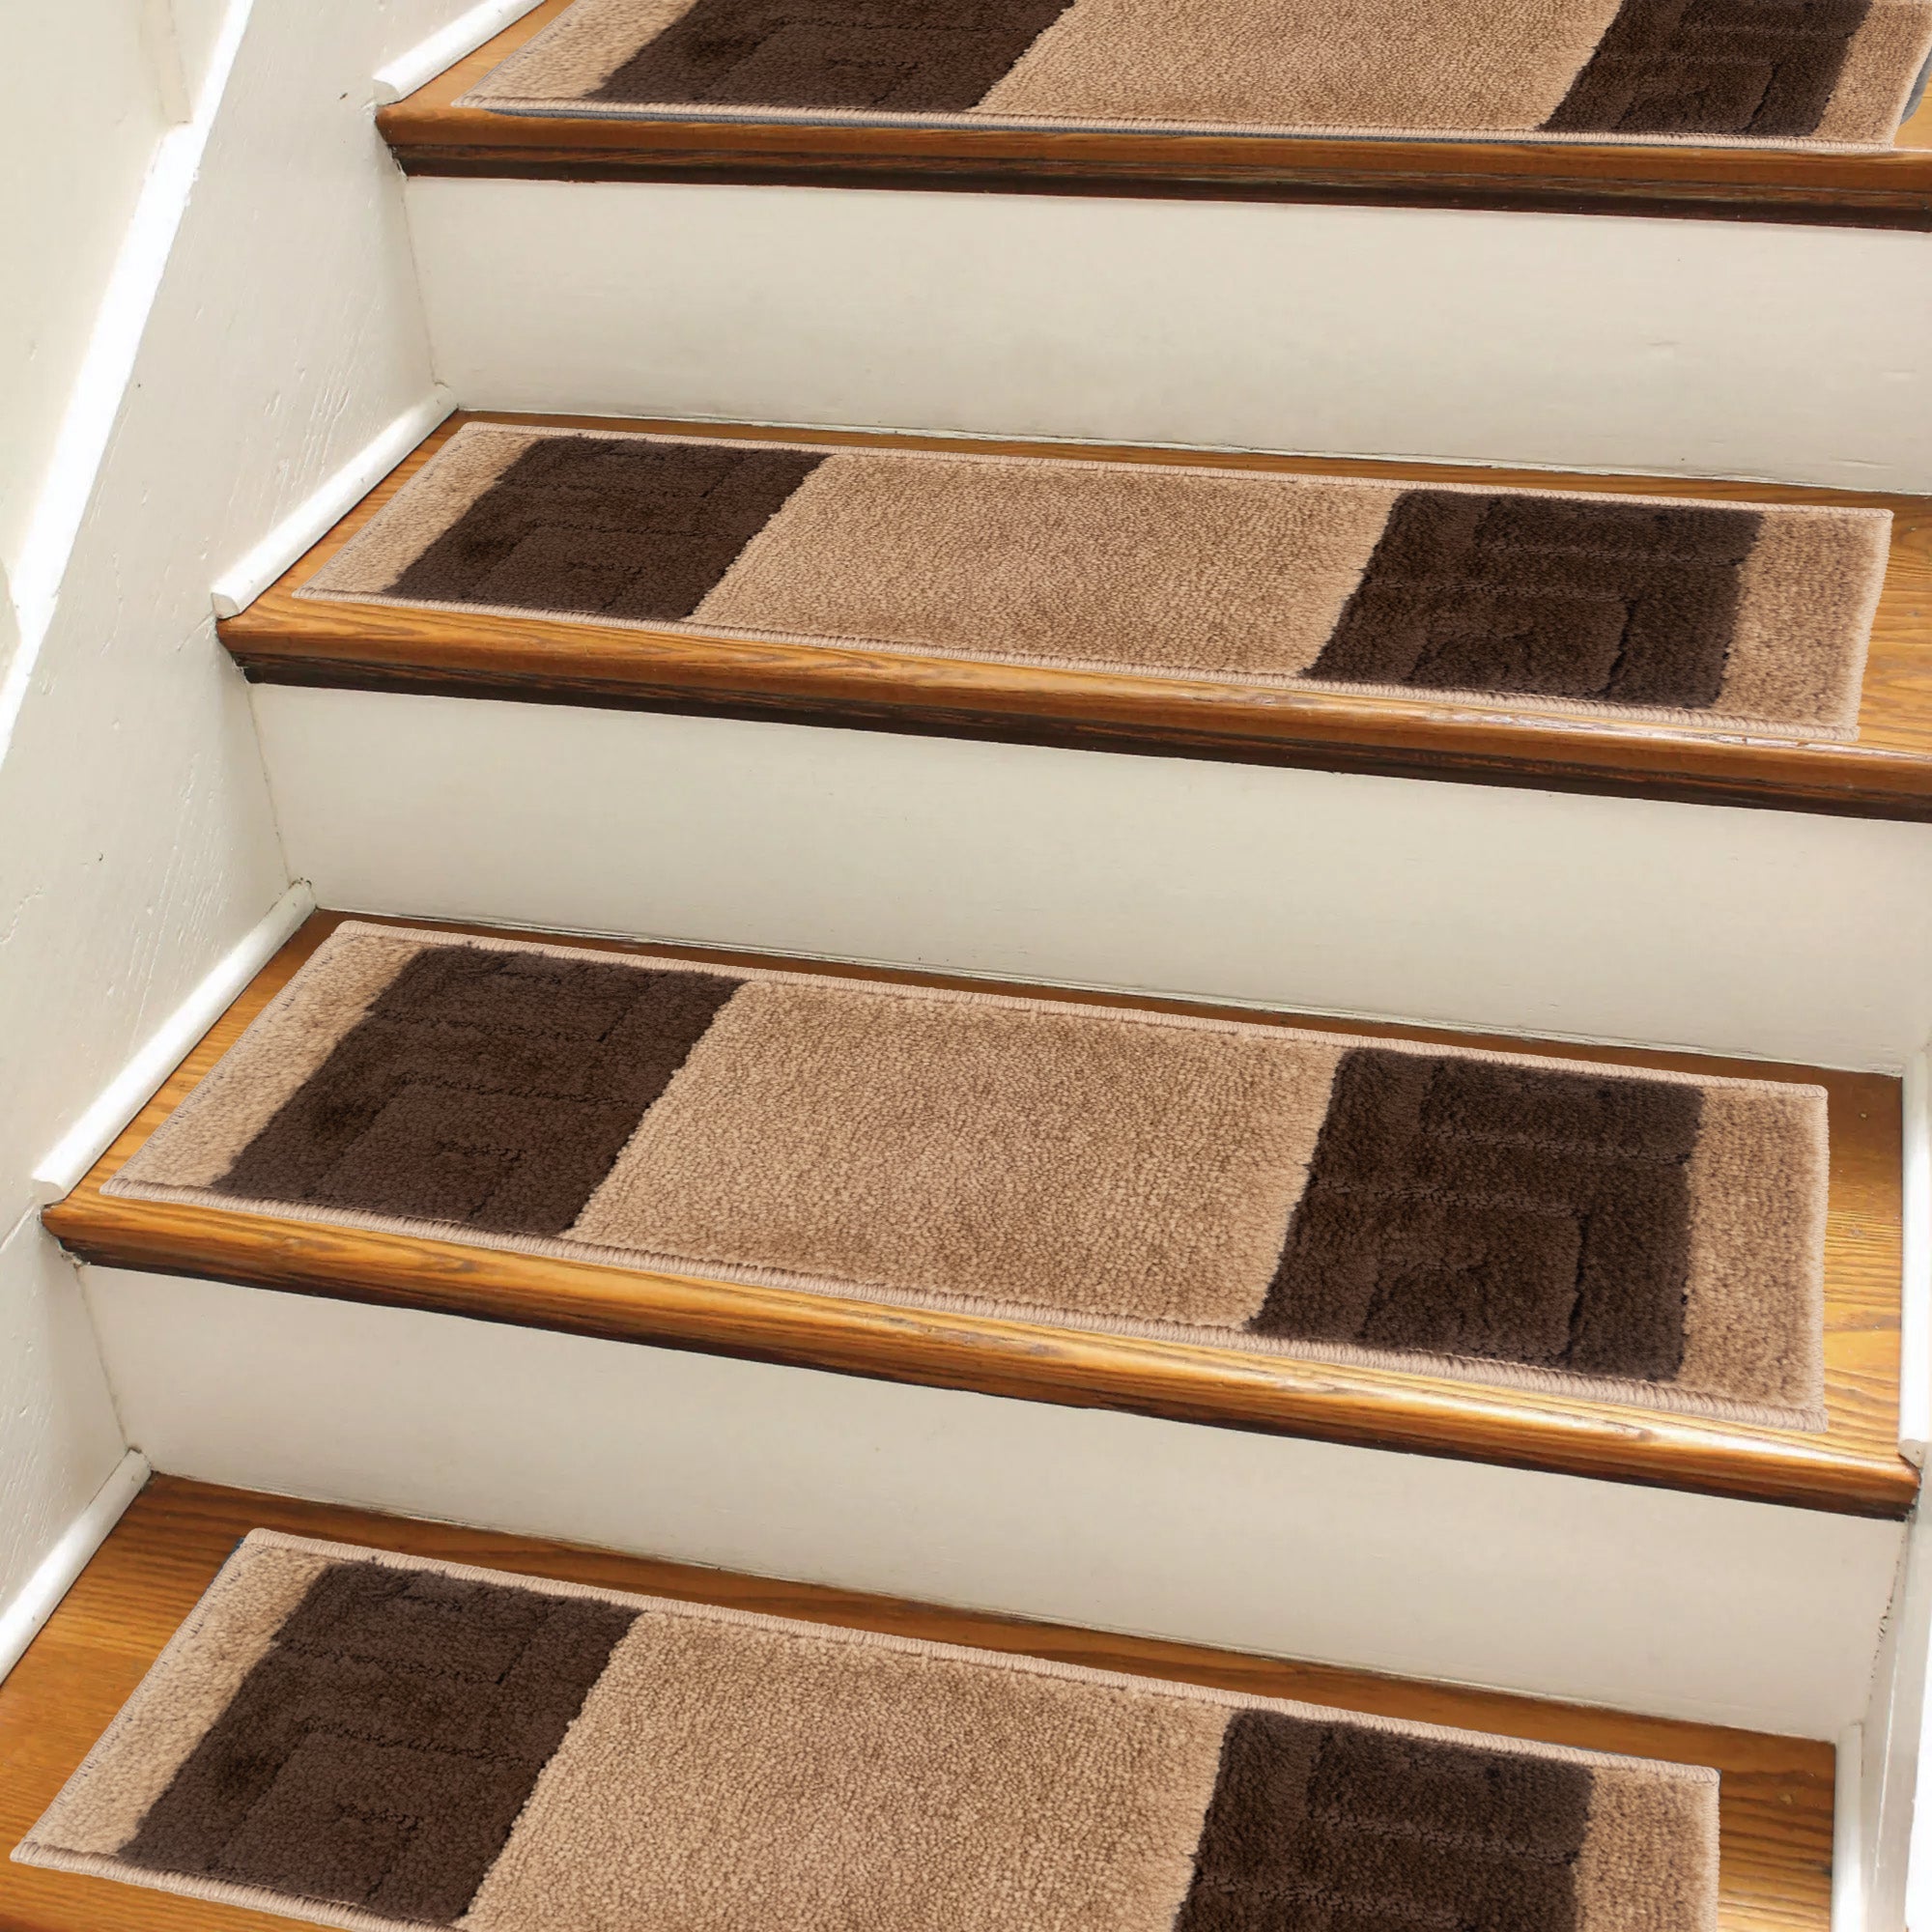 Machine Washable Custom Size Stair Tread Meander Border Camel Beige Color Set of 13 Custom length by Inch and 26" Wide